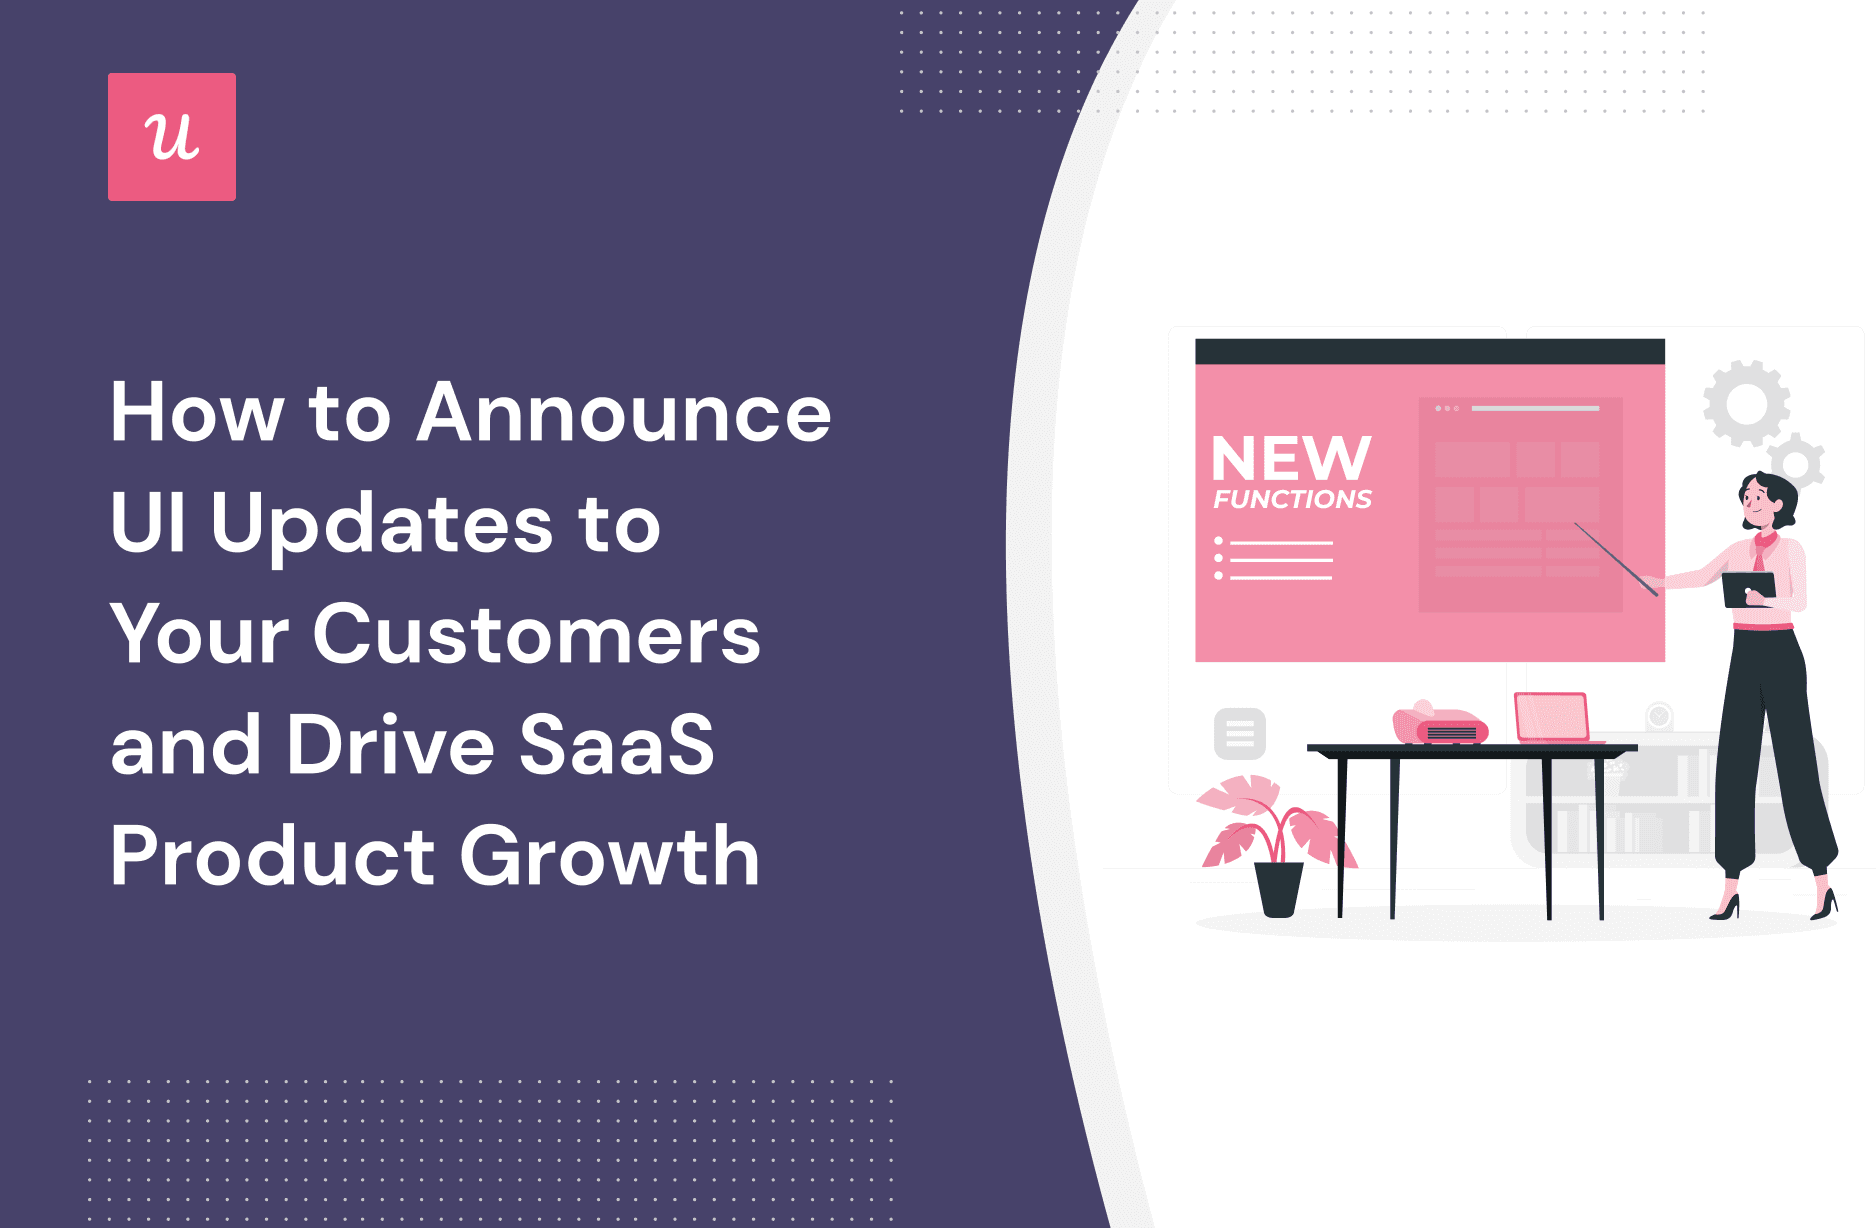 How to Announce UI Updates to Your Customers and Drive SaaS Product Growth cover